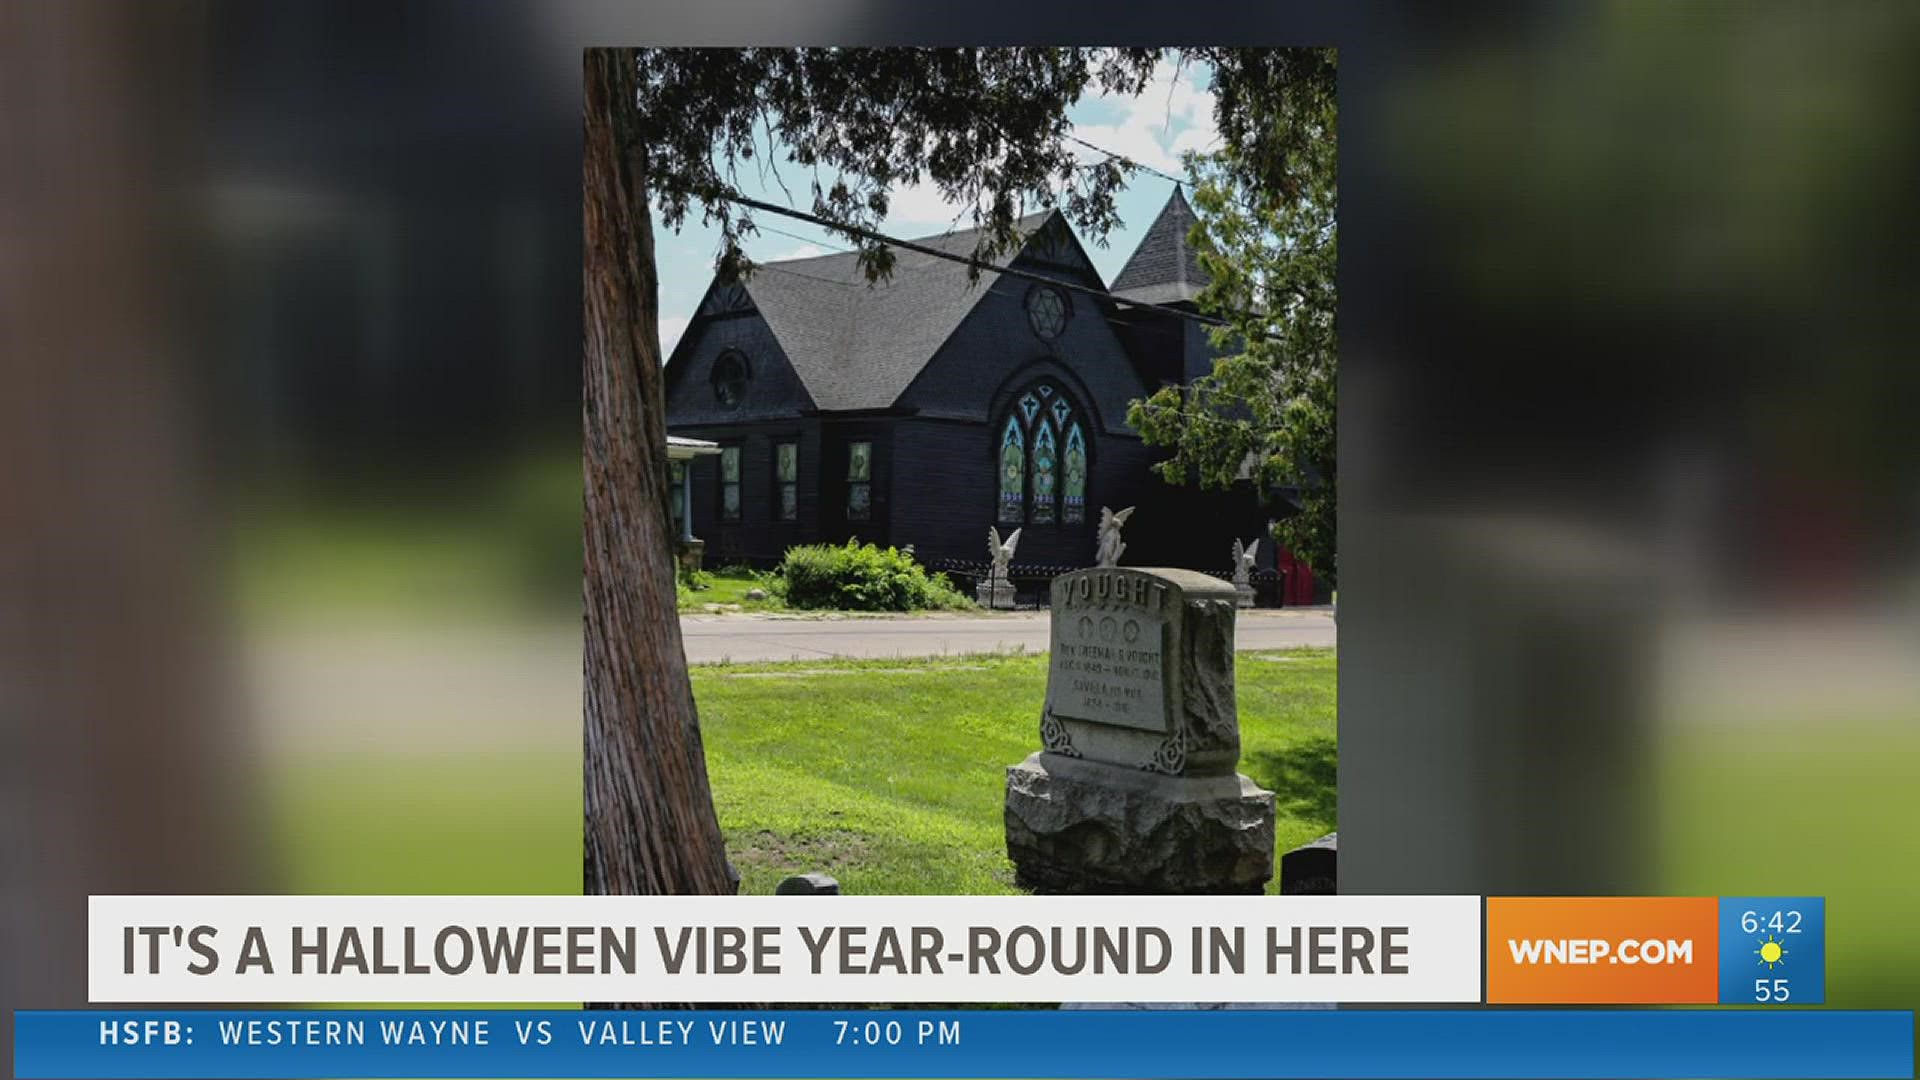 It's a not-so-typical home renovation in one part of Columbia County. A man has converted a once empty church into a place with Halloween vibes year-round.